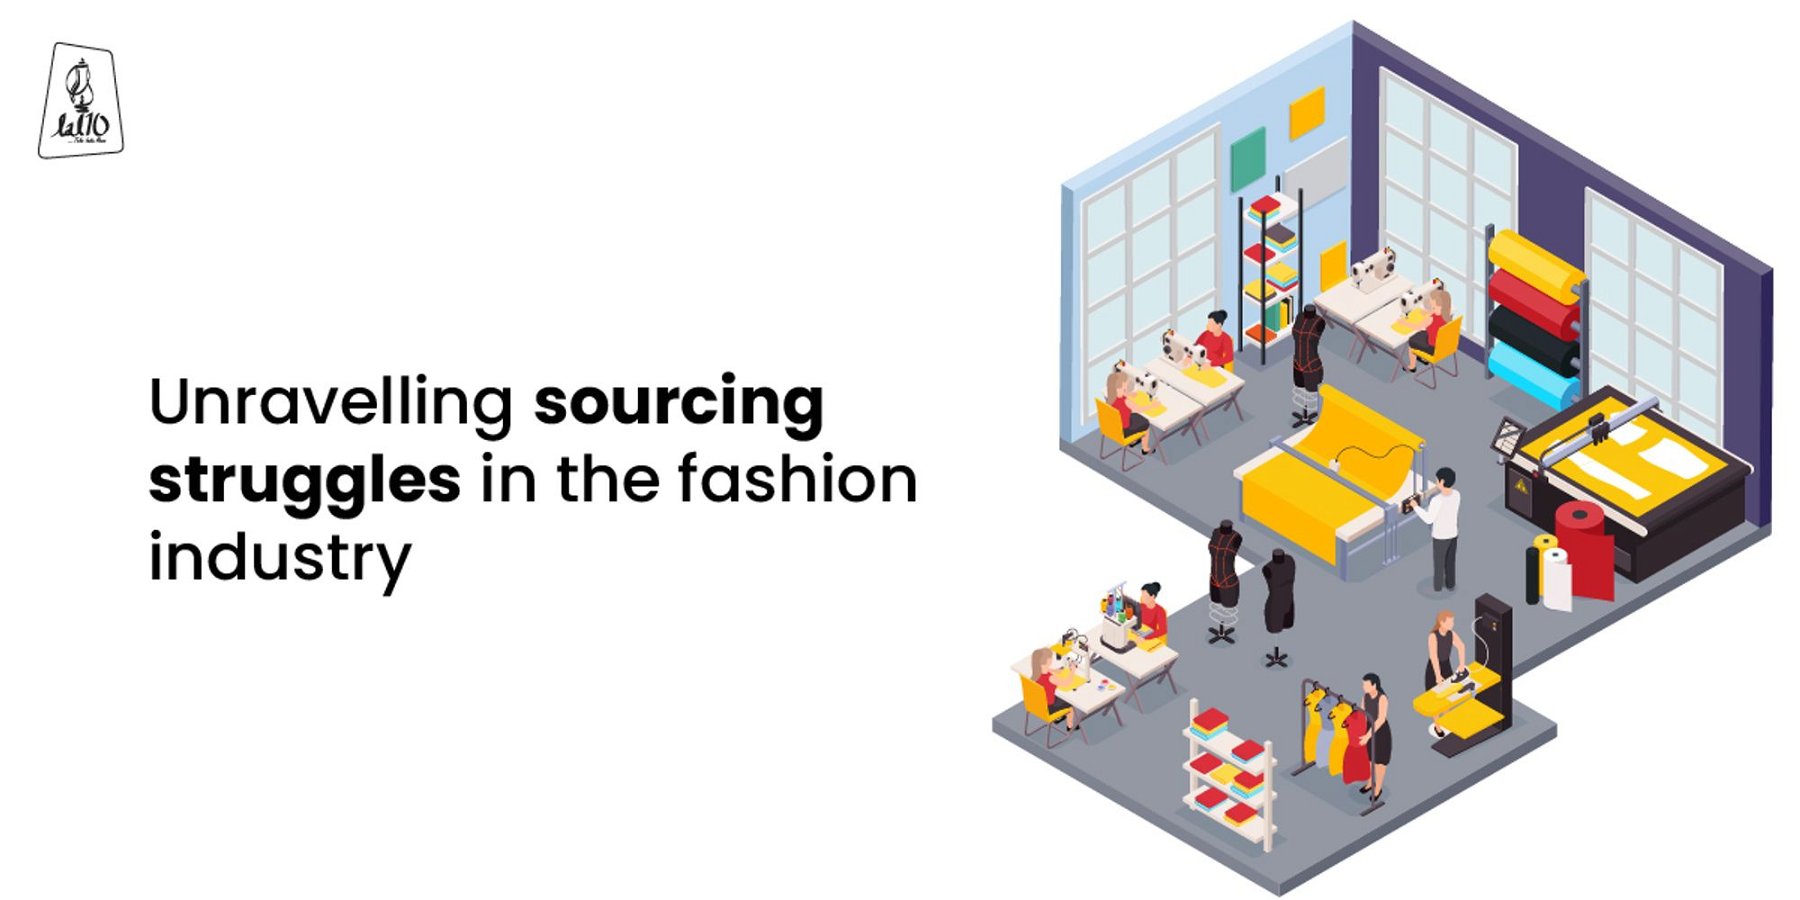 Unravelling sourcing struggles in the fashion industry